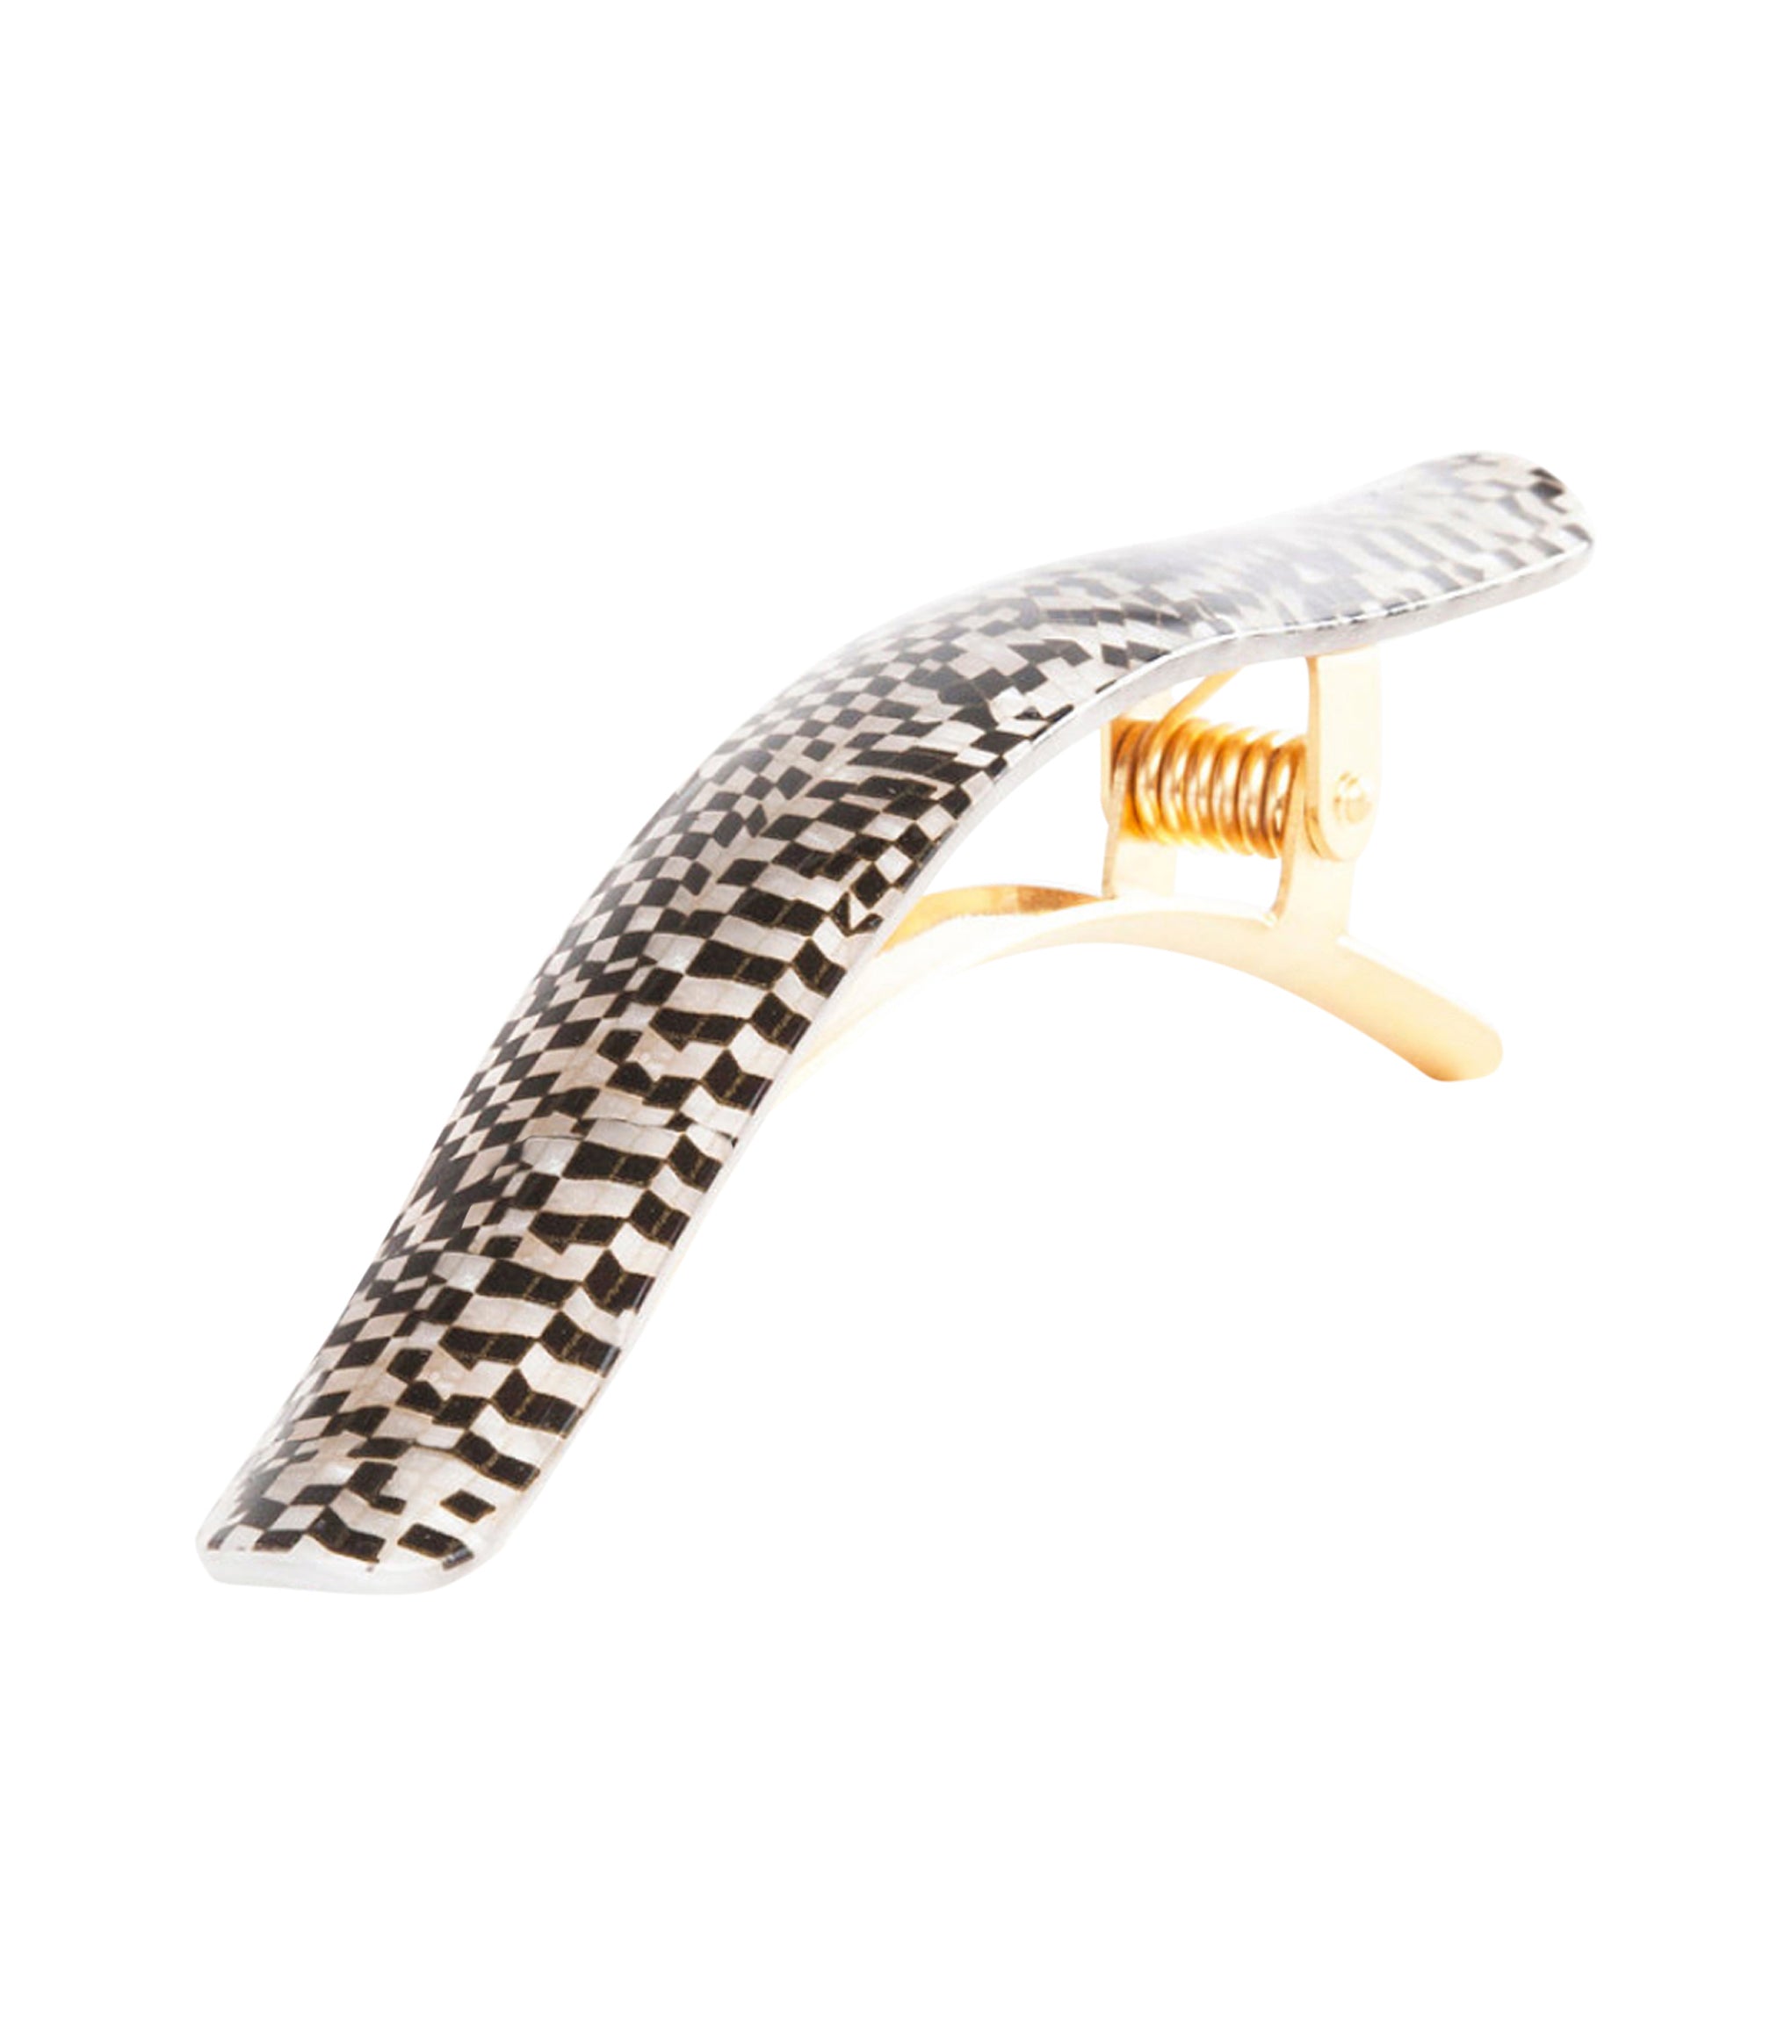 Ficcare Ficcarissimo Hair Clip in Black and Pearl Checkers and Gold Plated